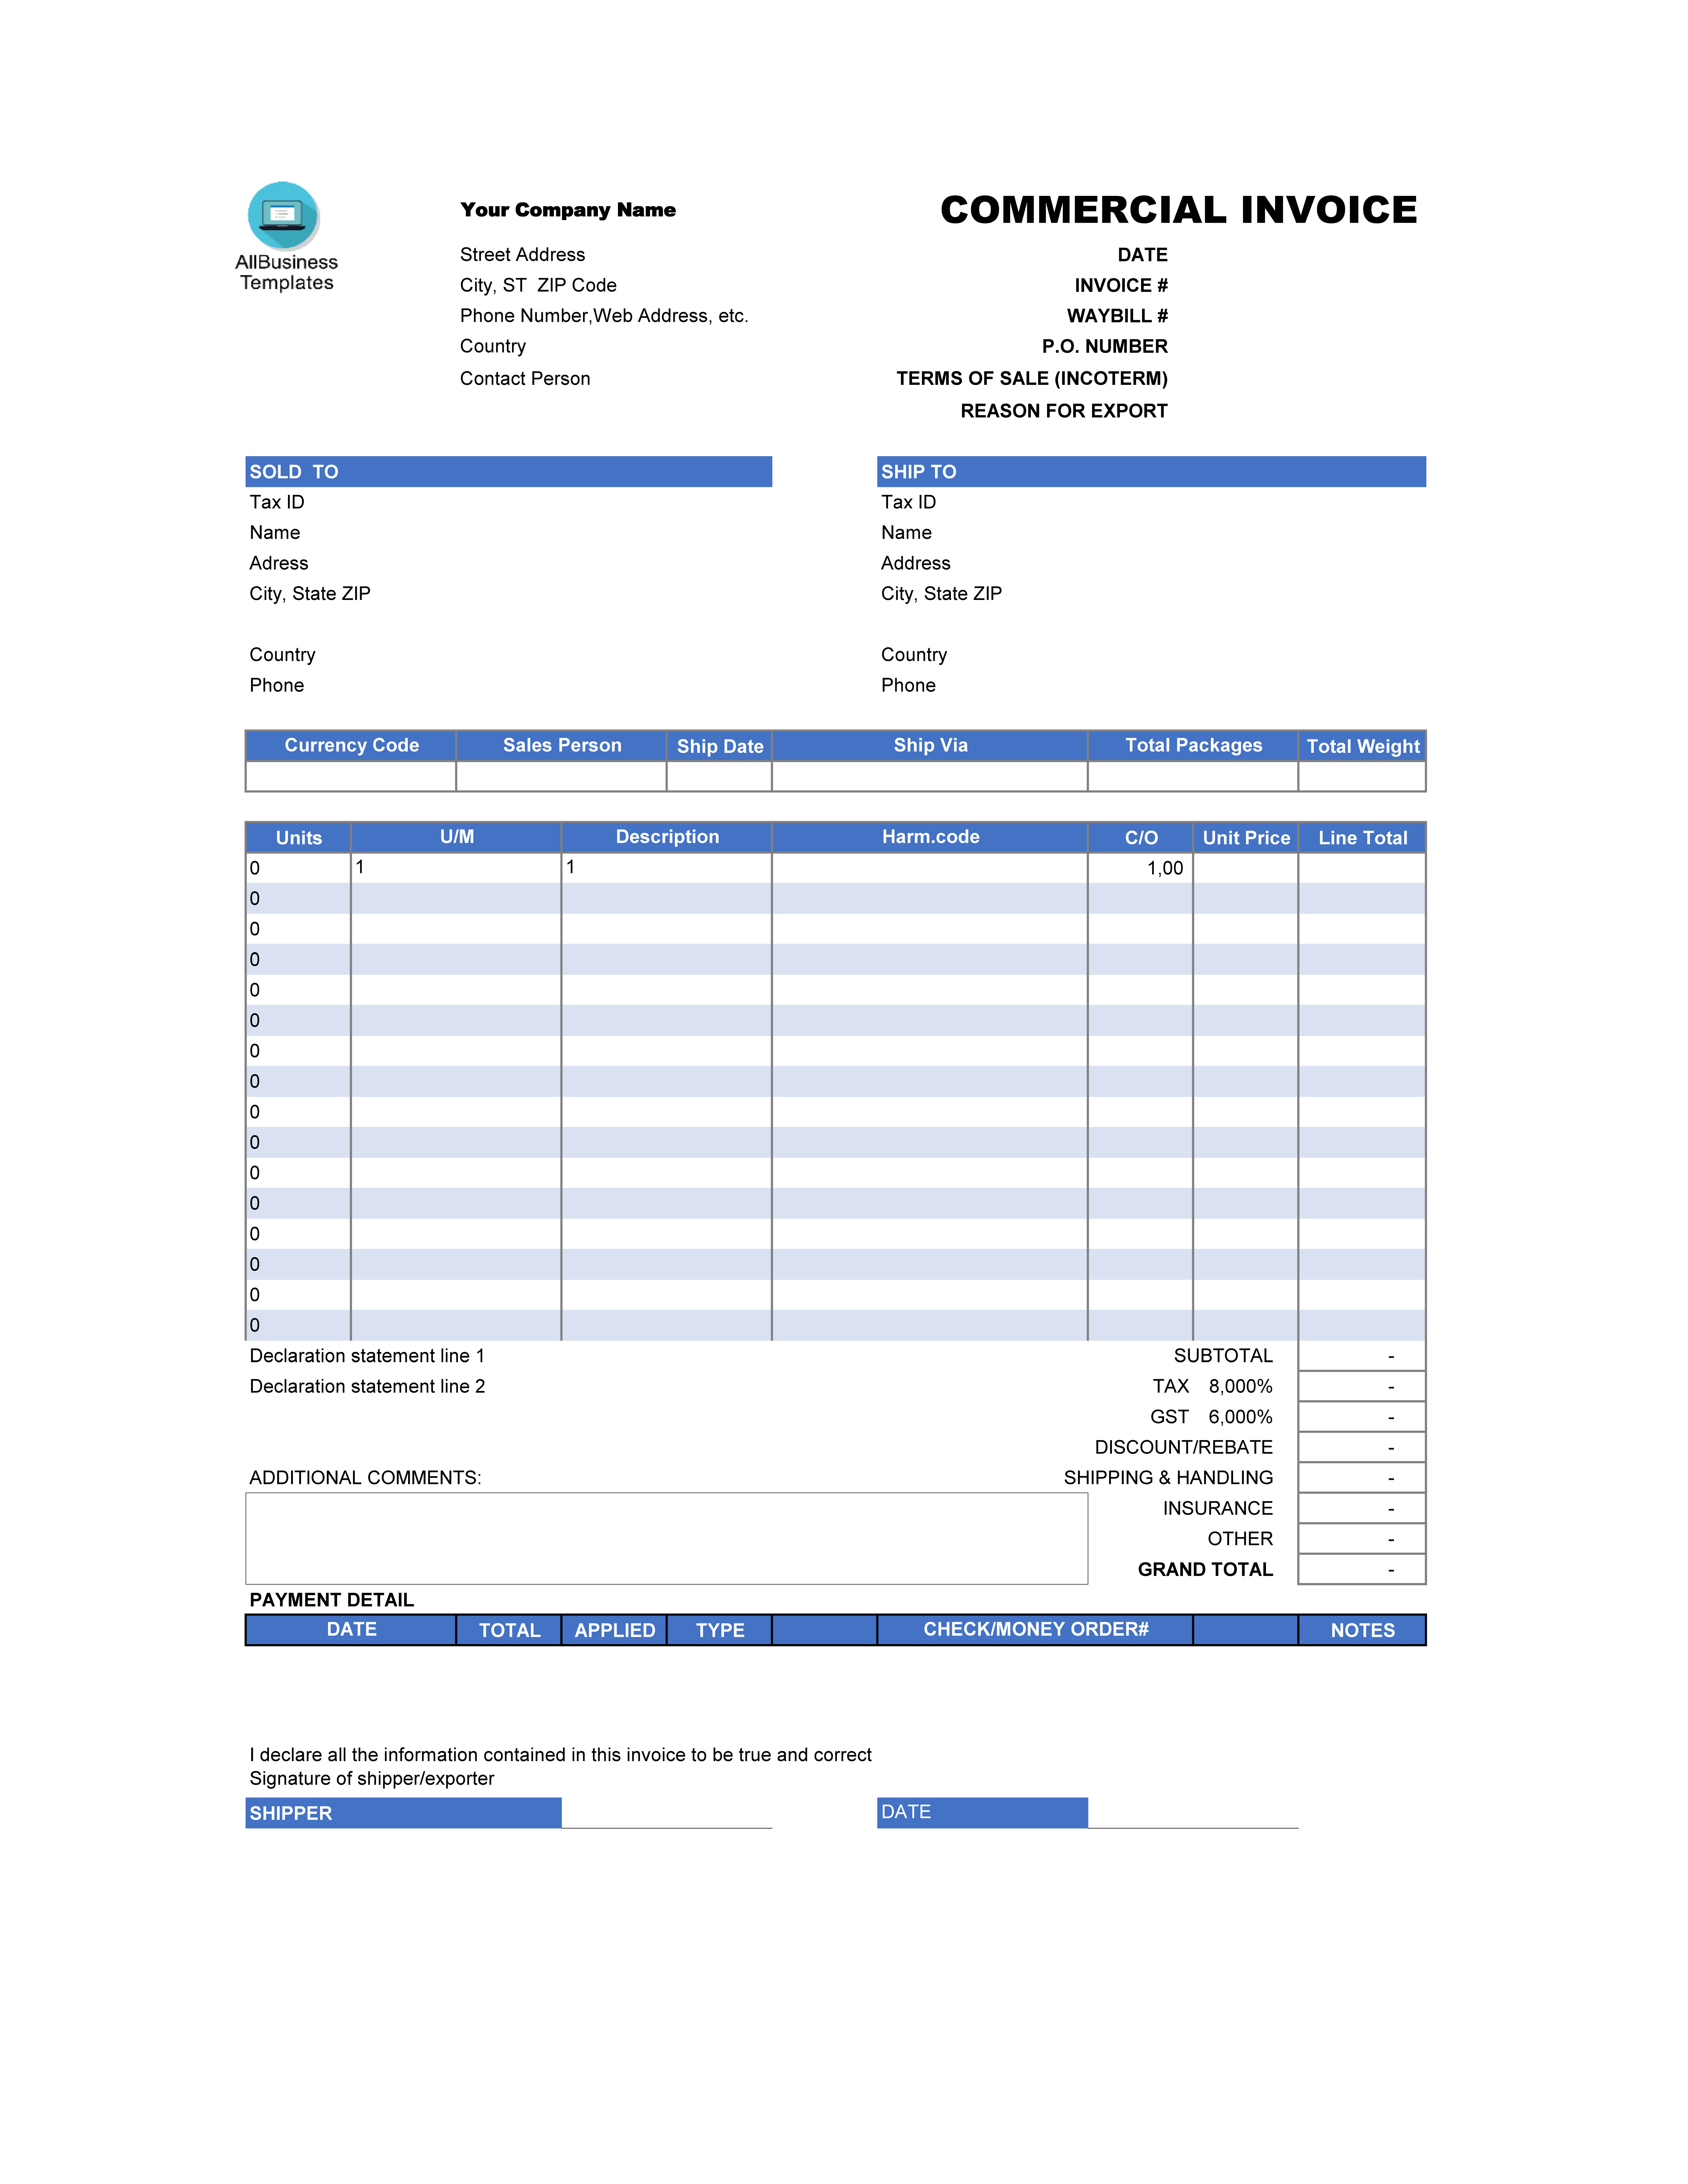 commercial-invoice-excel-templates-at-allbusinesstemplates